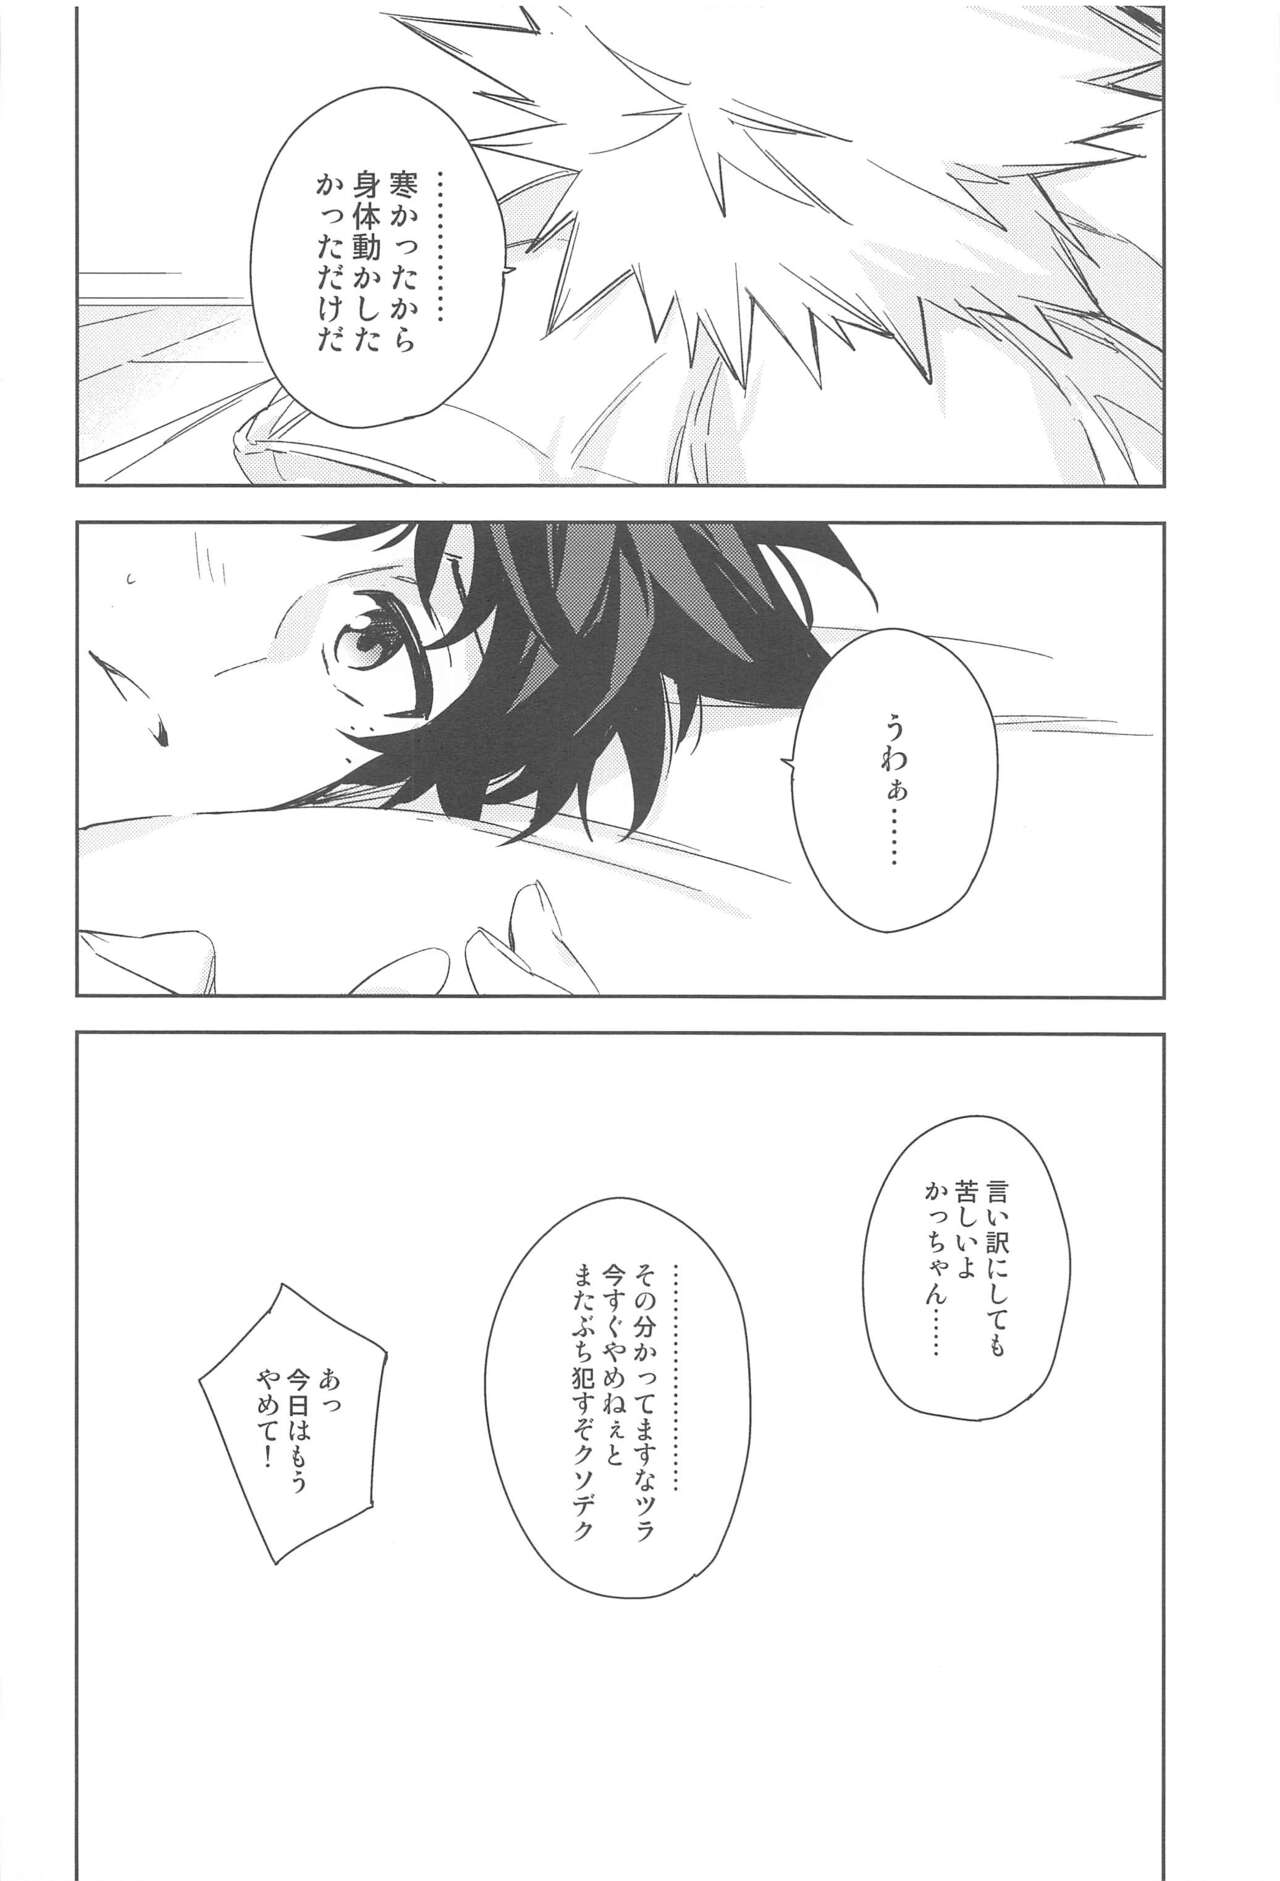 [lapin] You and Me (僕のヒーローアカデミア)